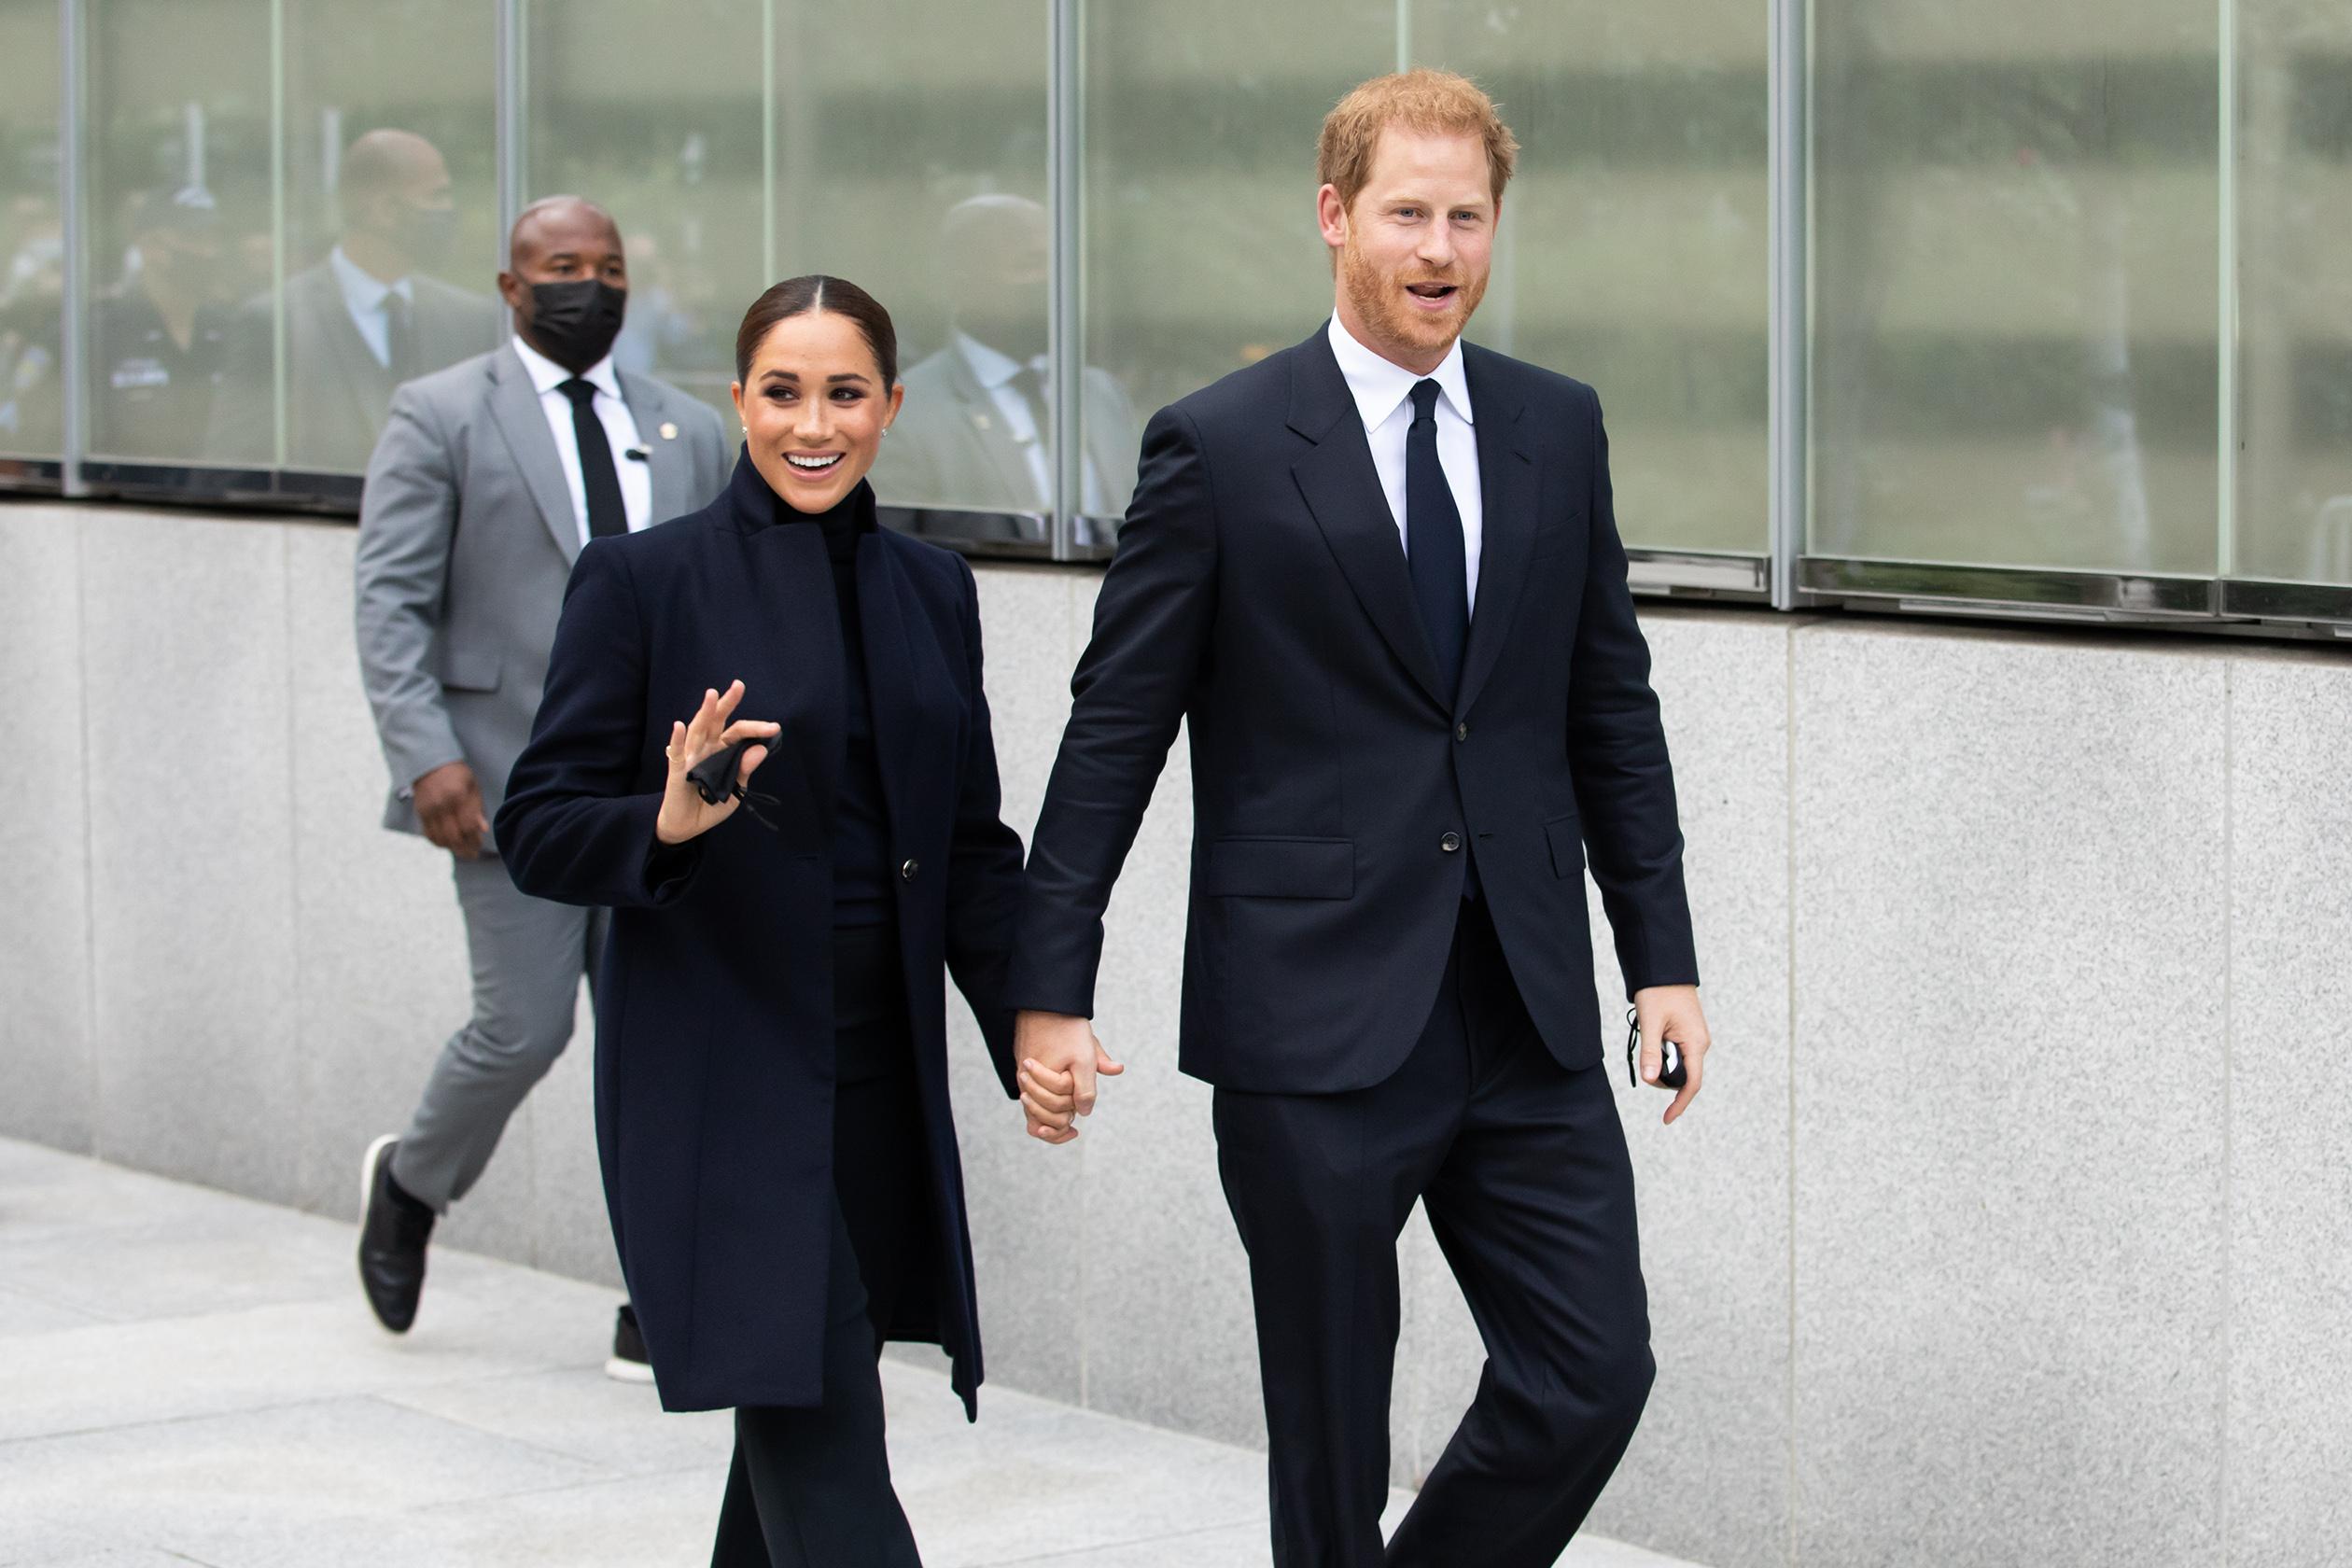 Prince Harry and Meghan Markle walking and smiling